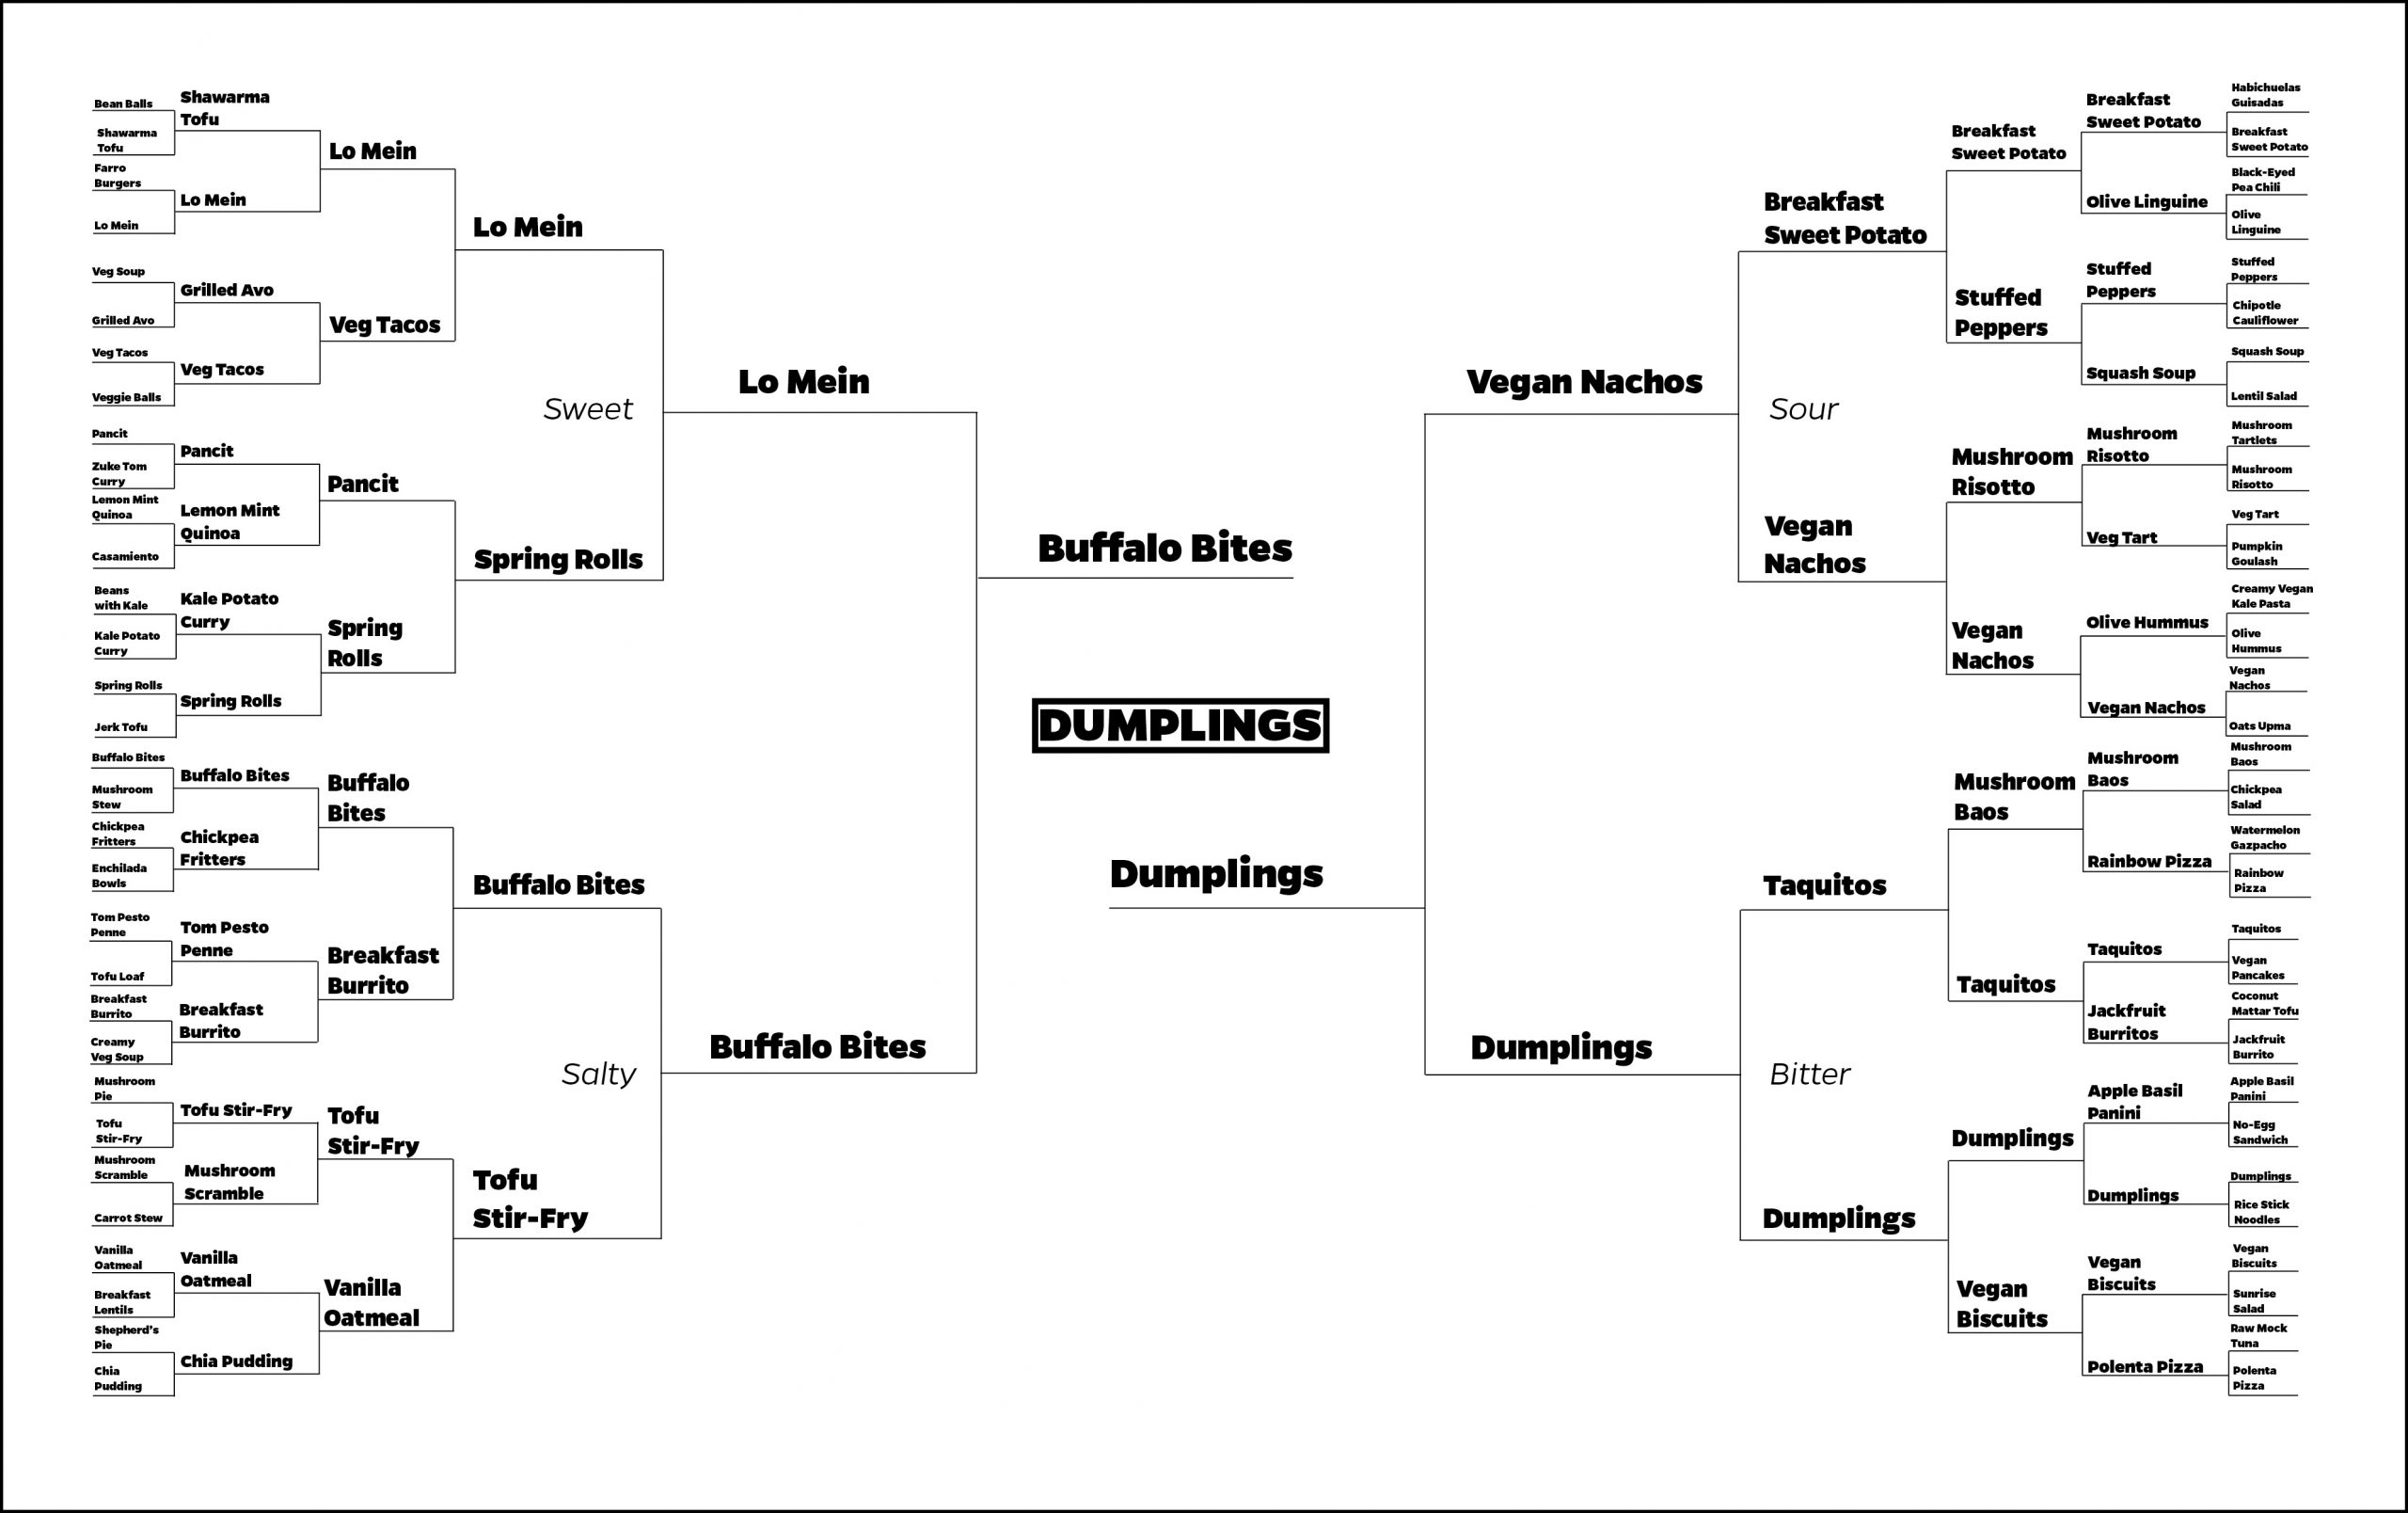 A single-elimination tournament bracket filled out through the championship match-up